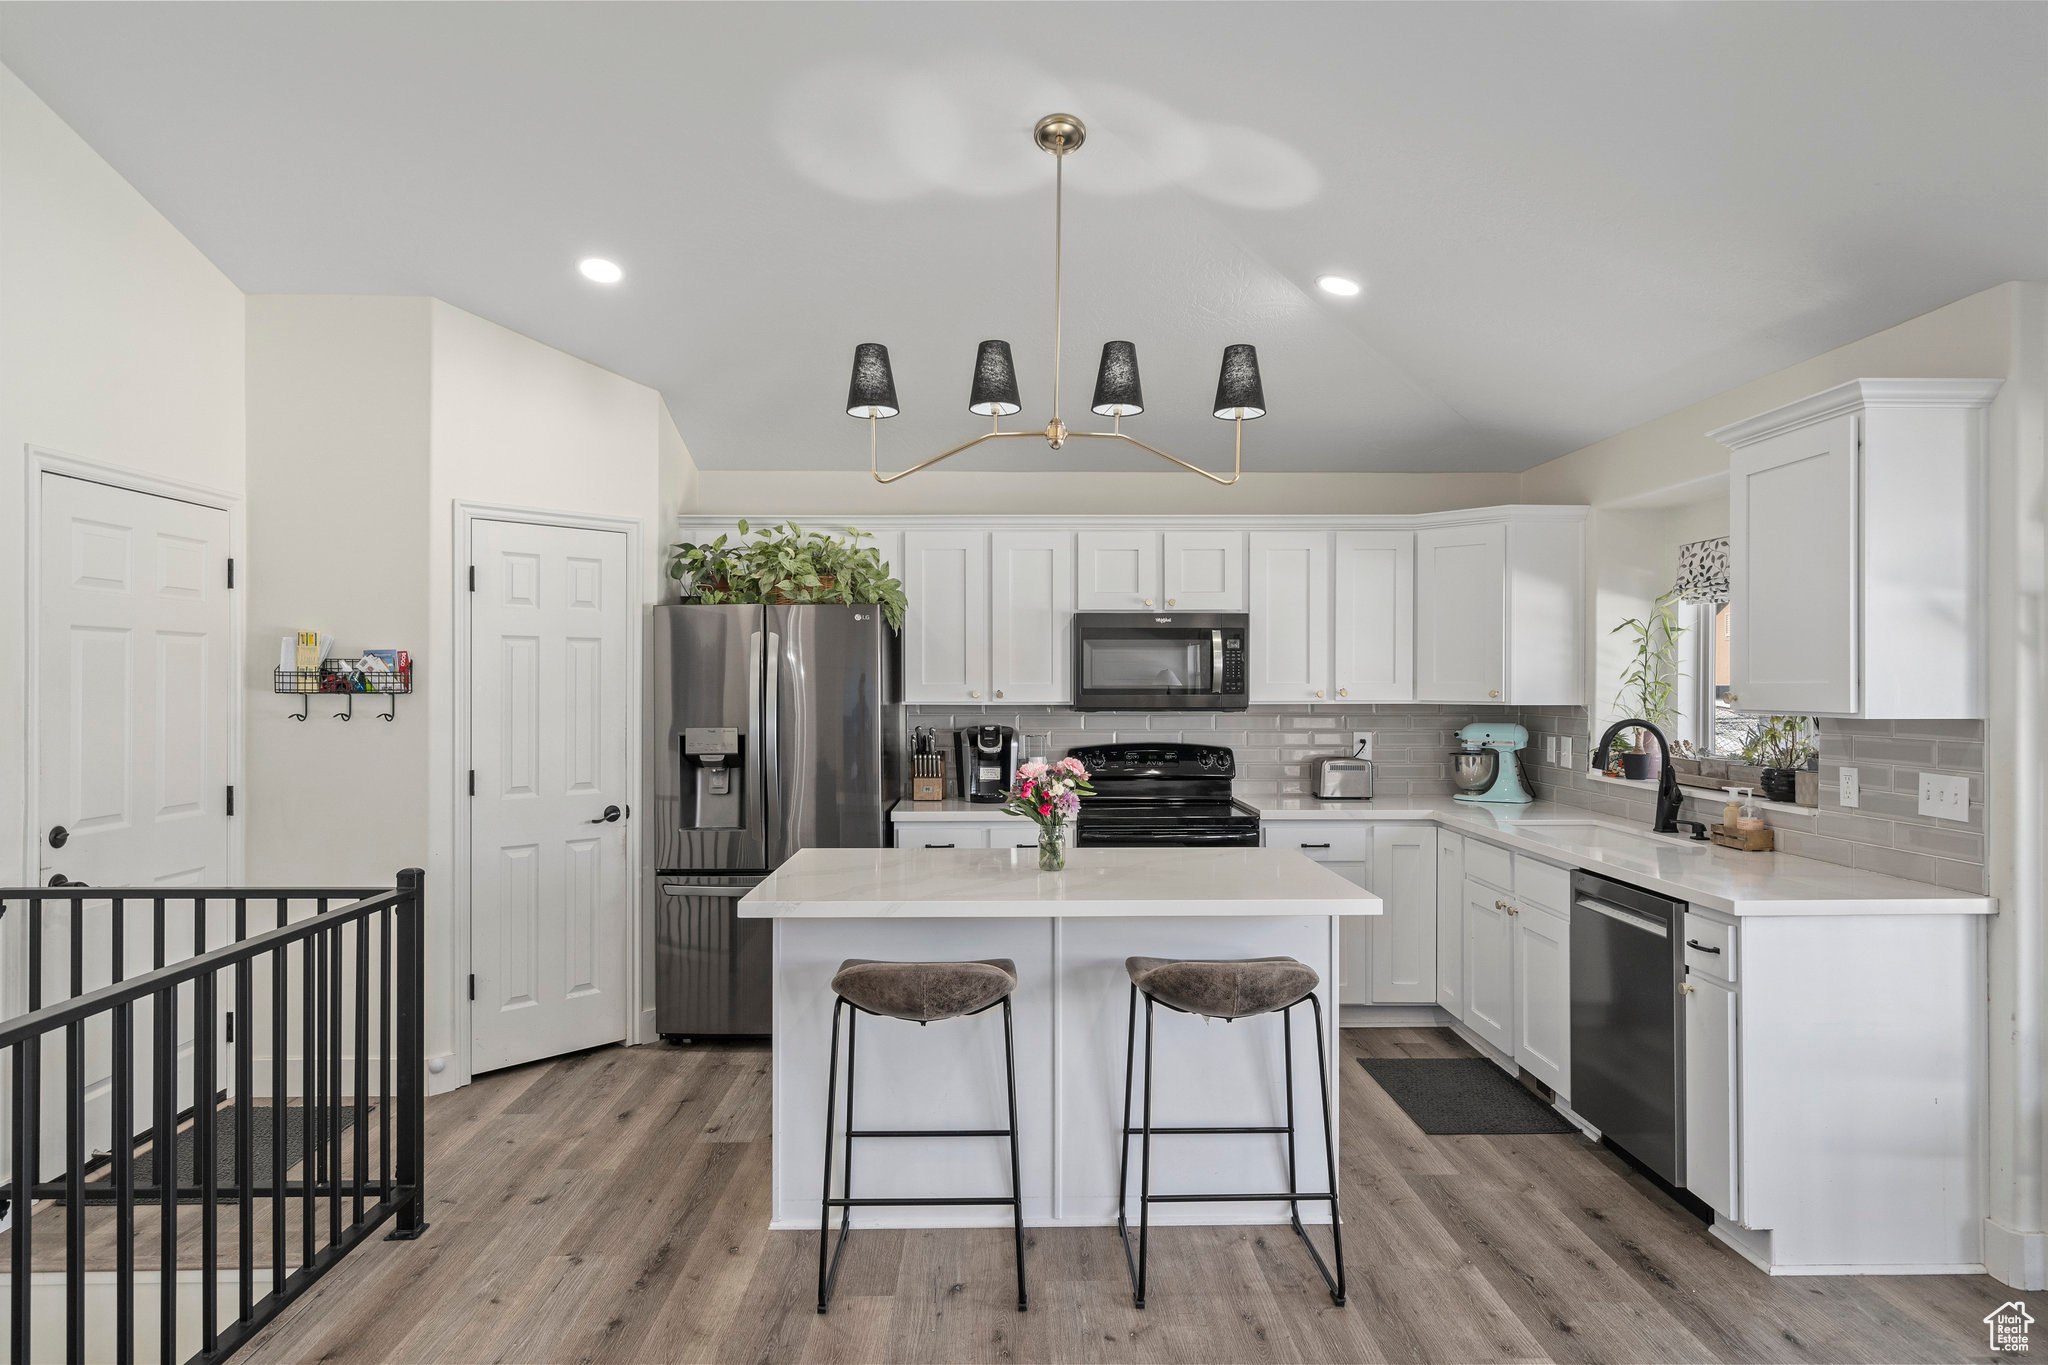 Kitchen with decorative light fixtures, stainless steel appliances, wood-style floors, a center island, and decorative  lighting